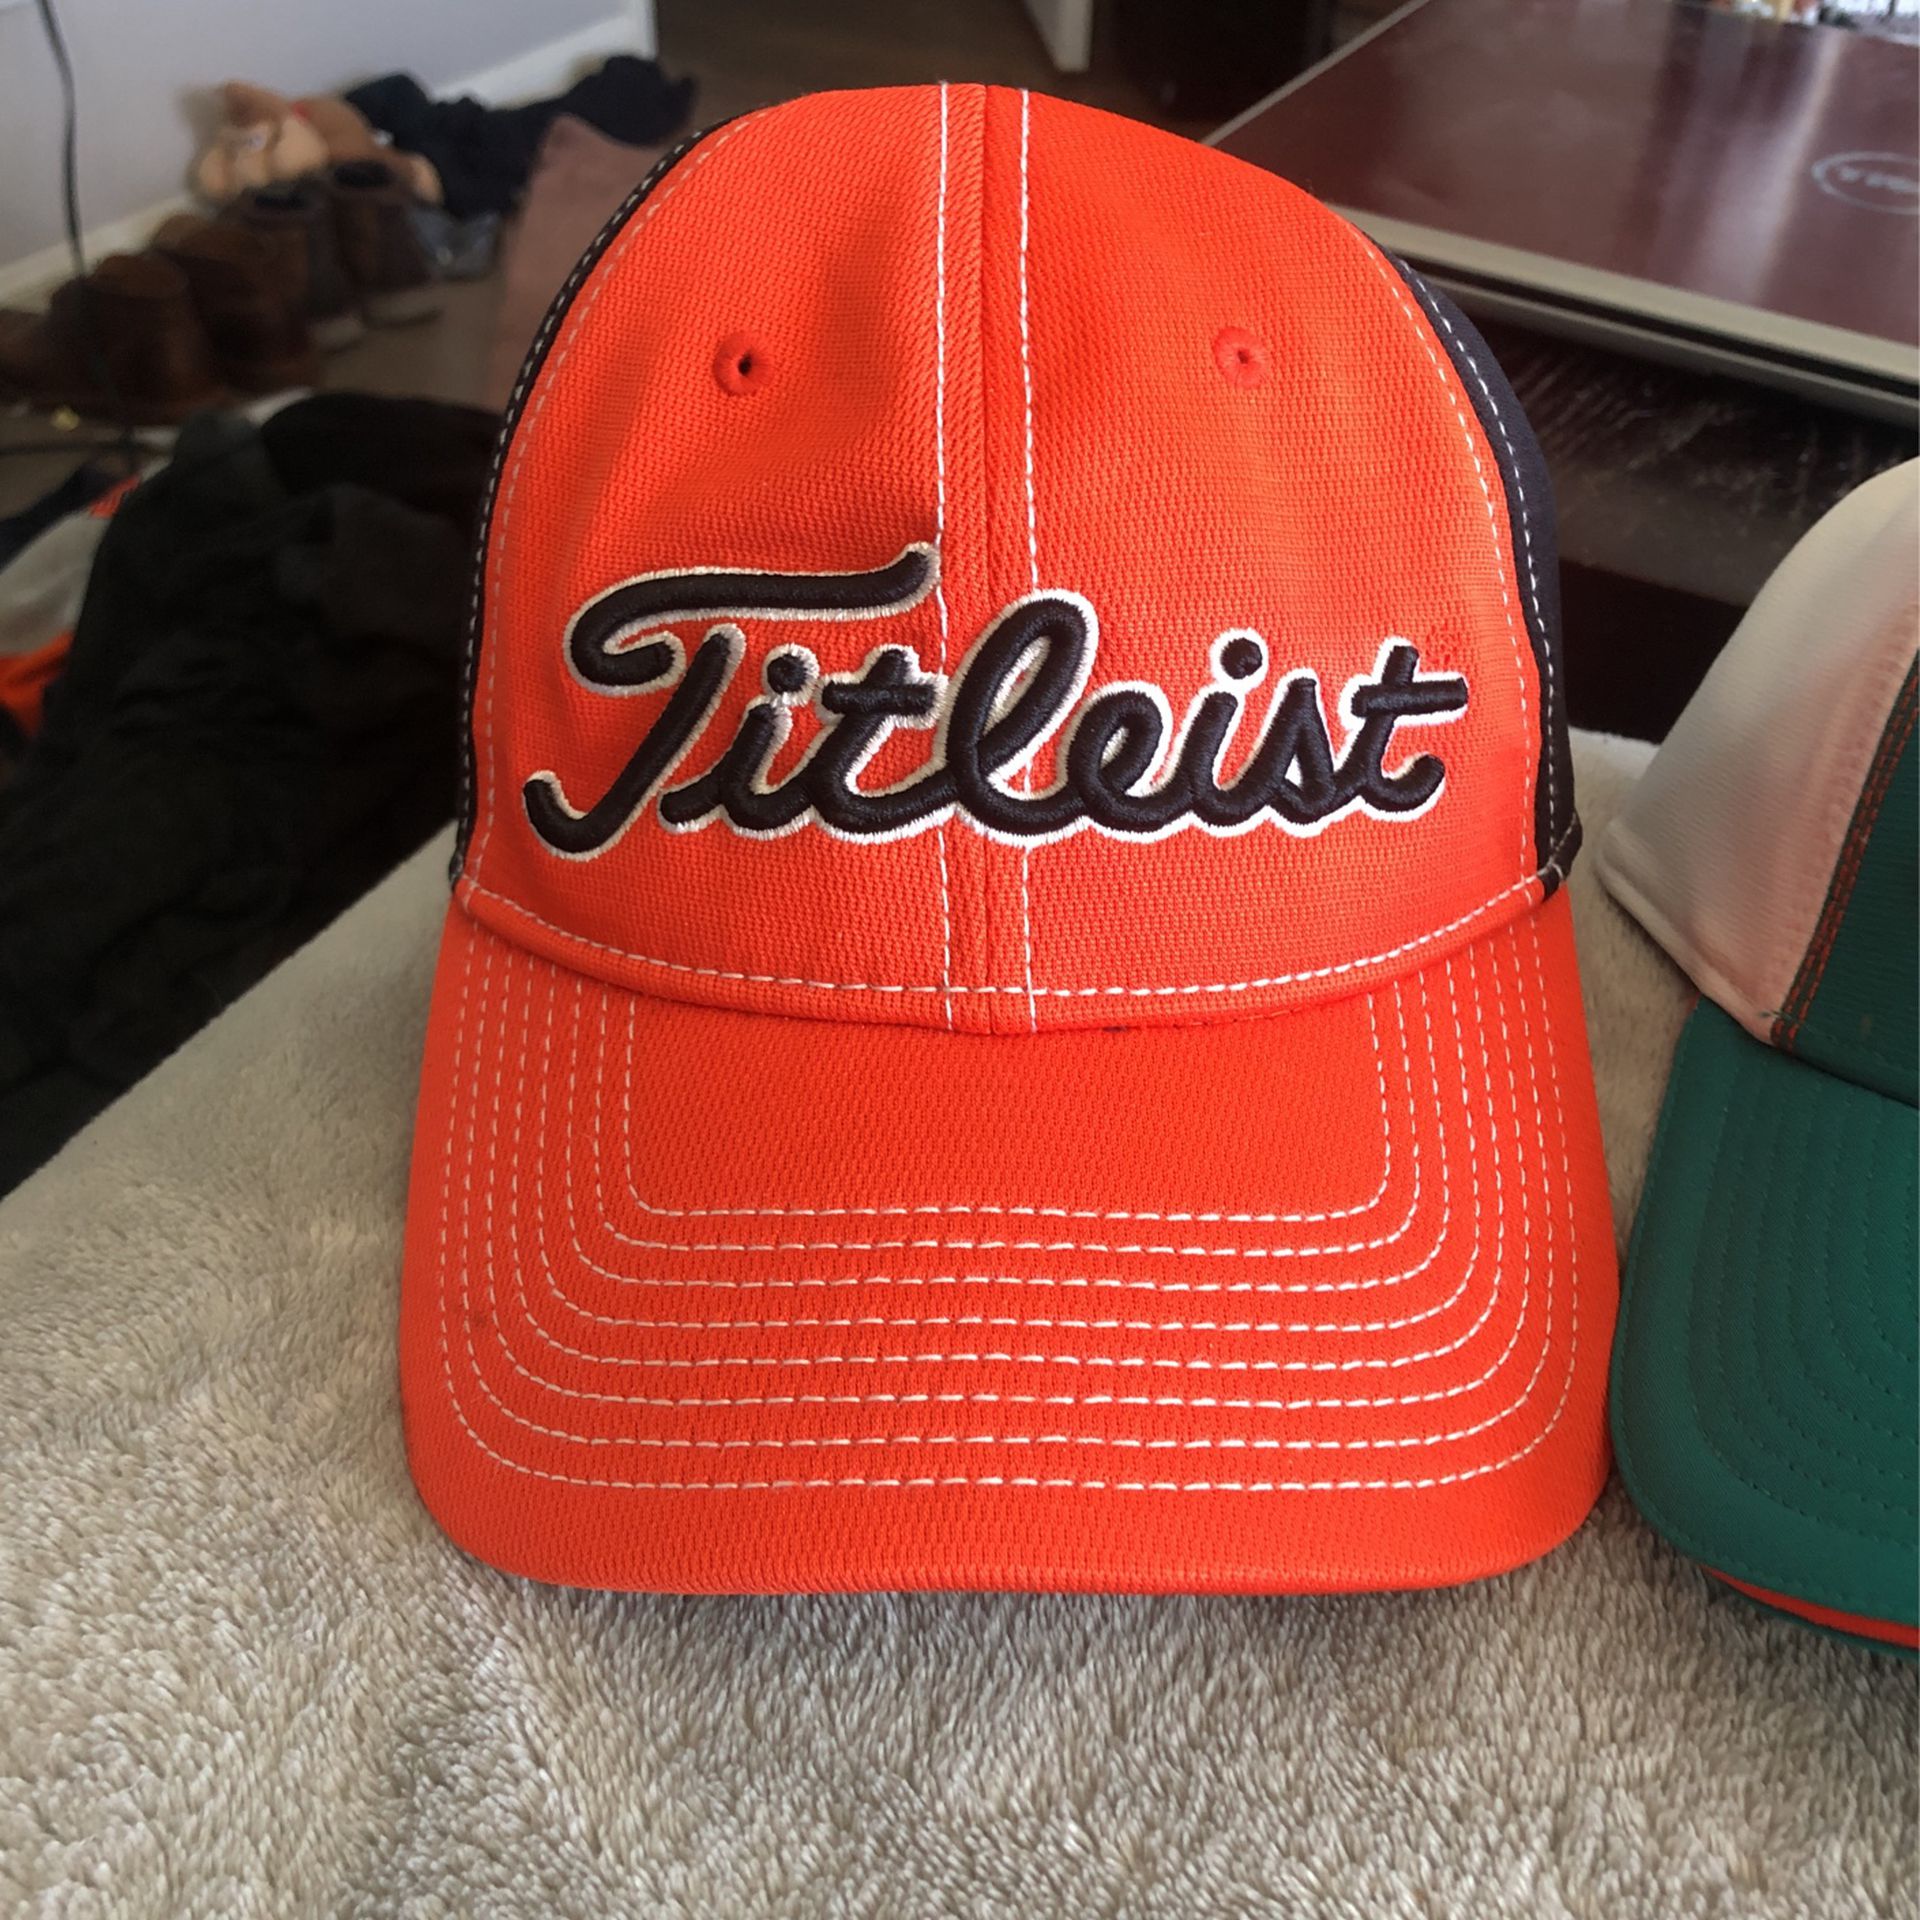 Titleist Golf Hats for Sale in San Marcos, CA - OfferUp